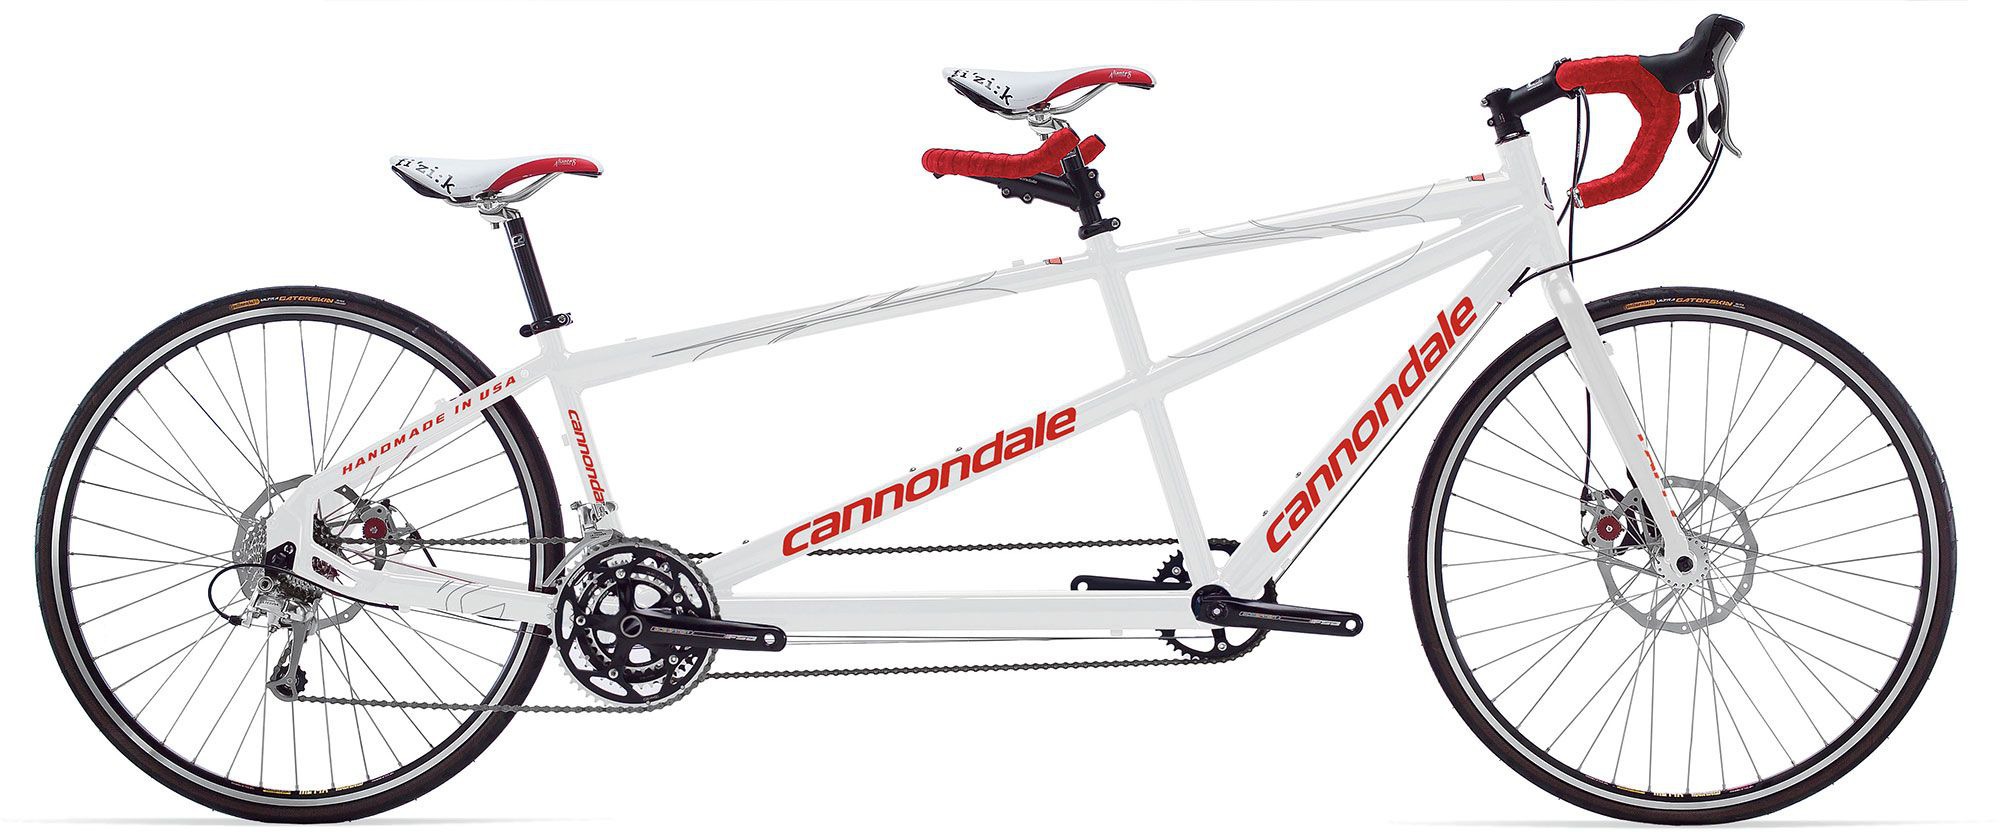 cannondale tandem for sale